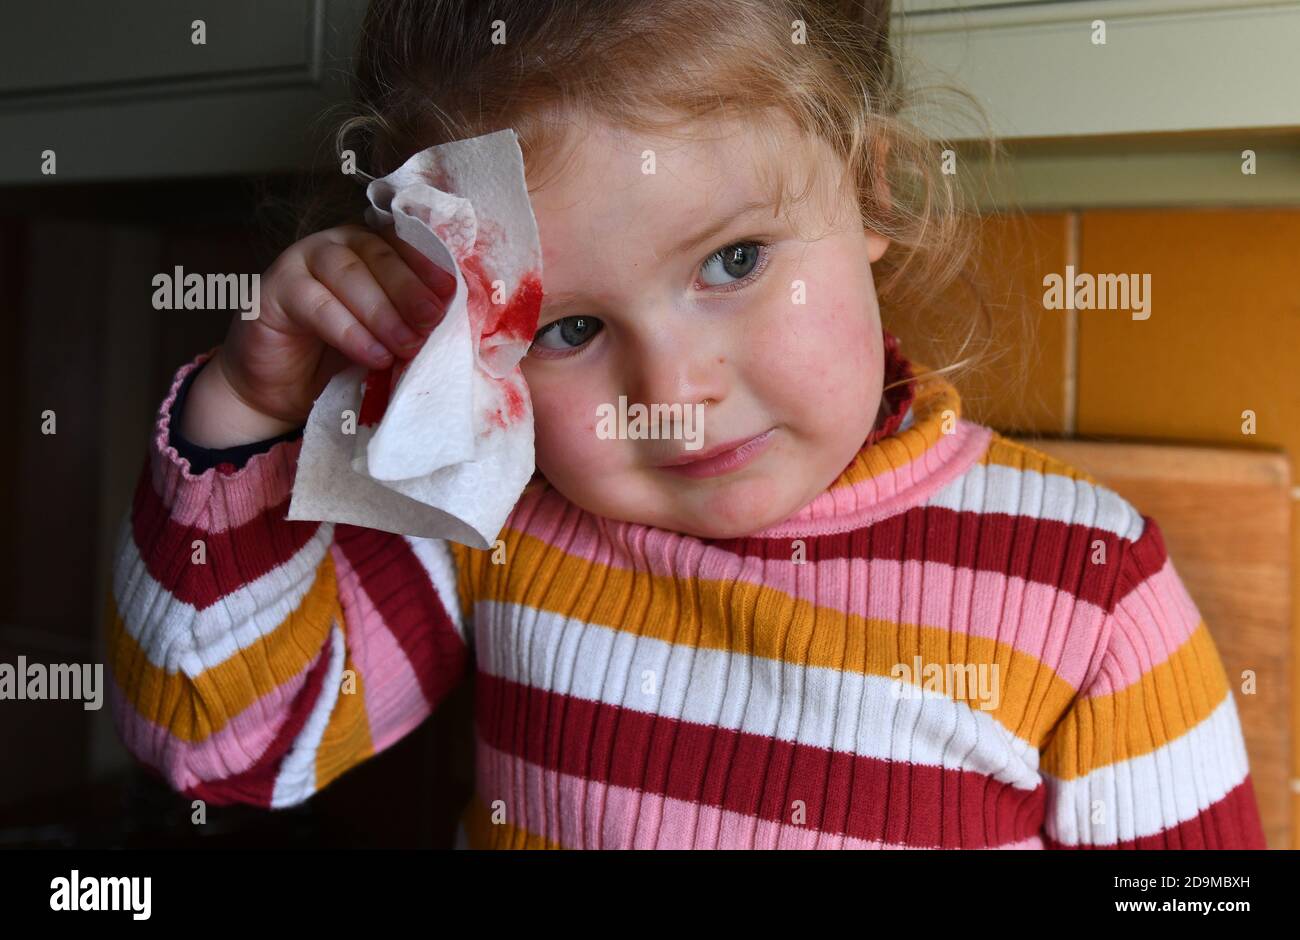 Child young girl nursing an injury after fall at home Stock Photo